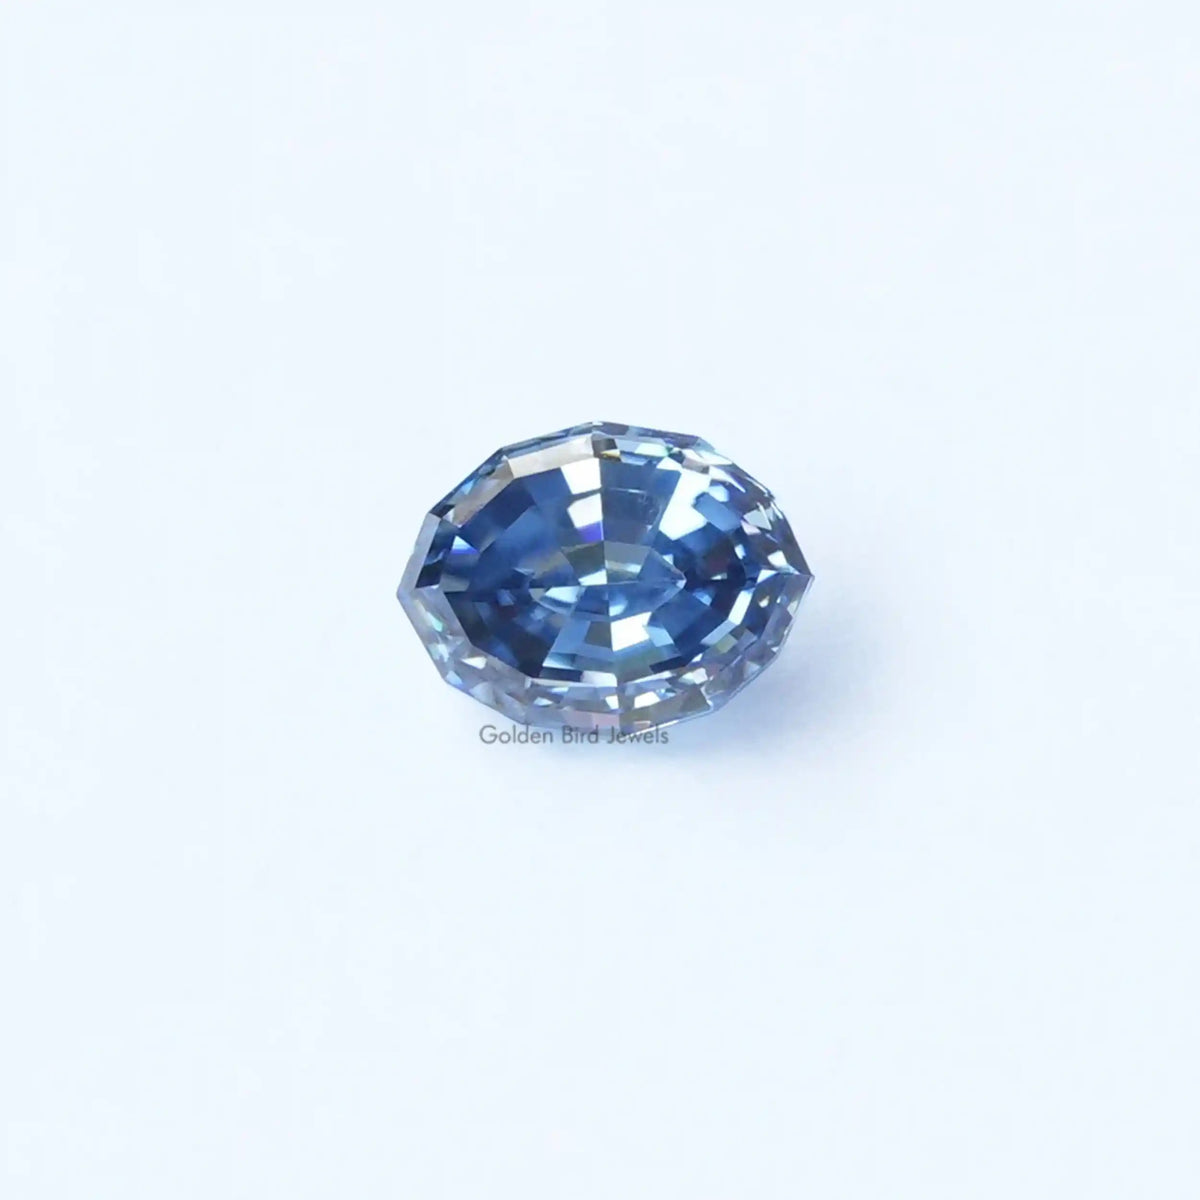 [Front view of step cut oval loose moissanite made of blue color]-[Golden Bird Jewels]